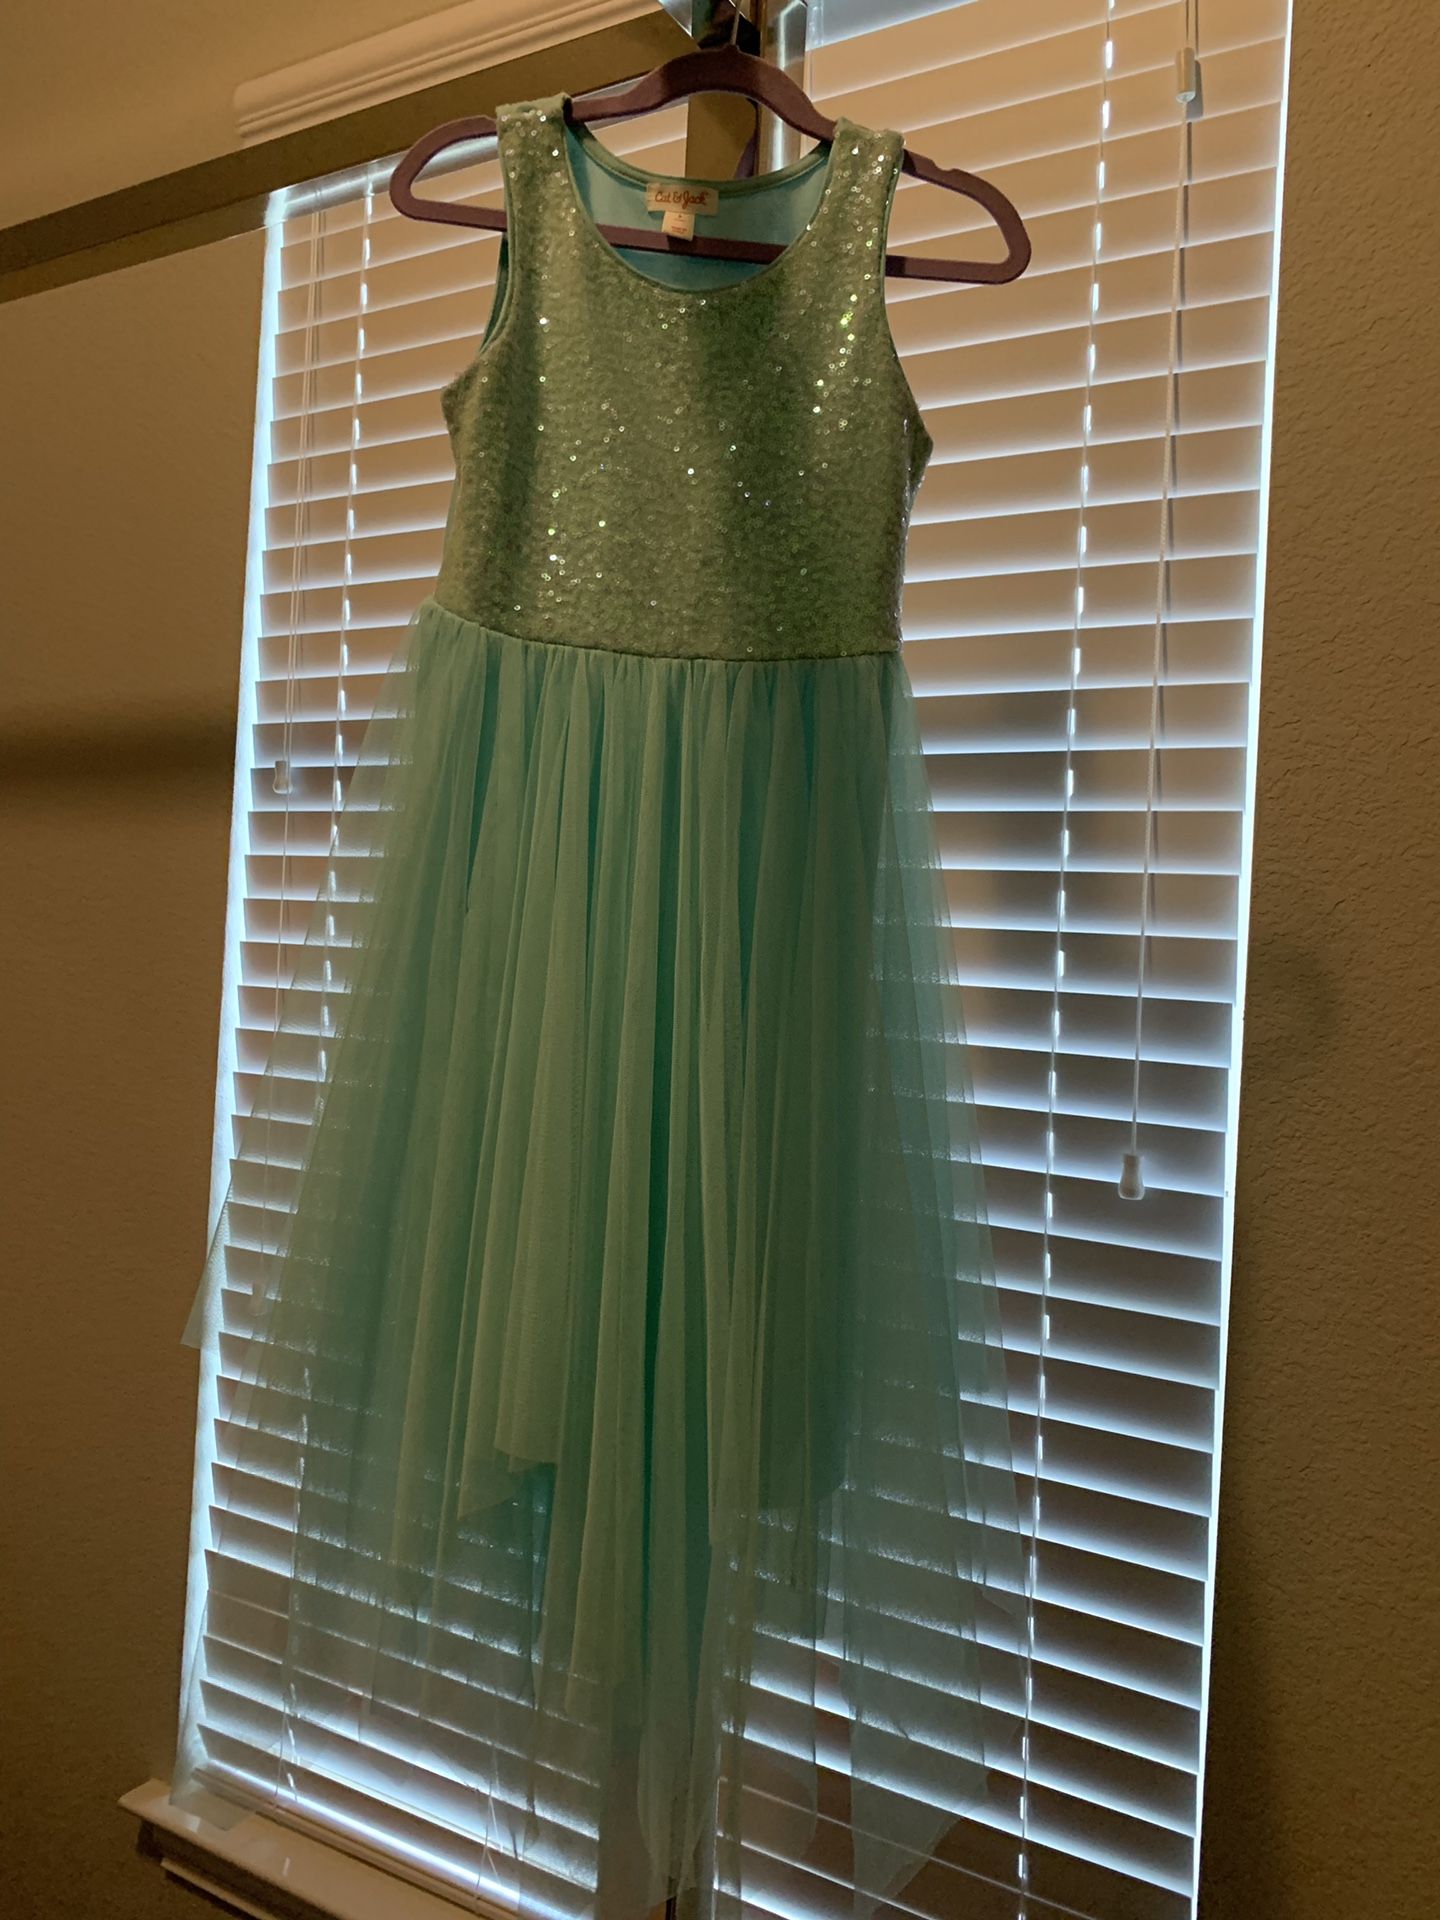 Girl’s dressy dress in teal with sequins design. Size Small. Worn once for wedding.